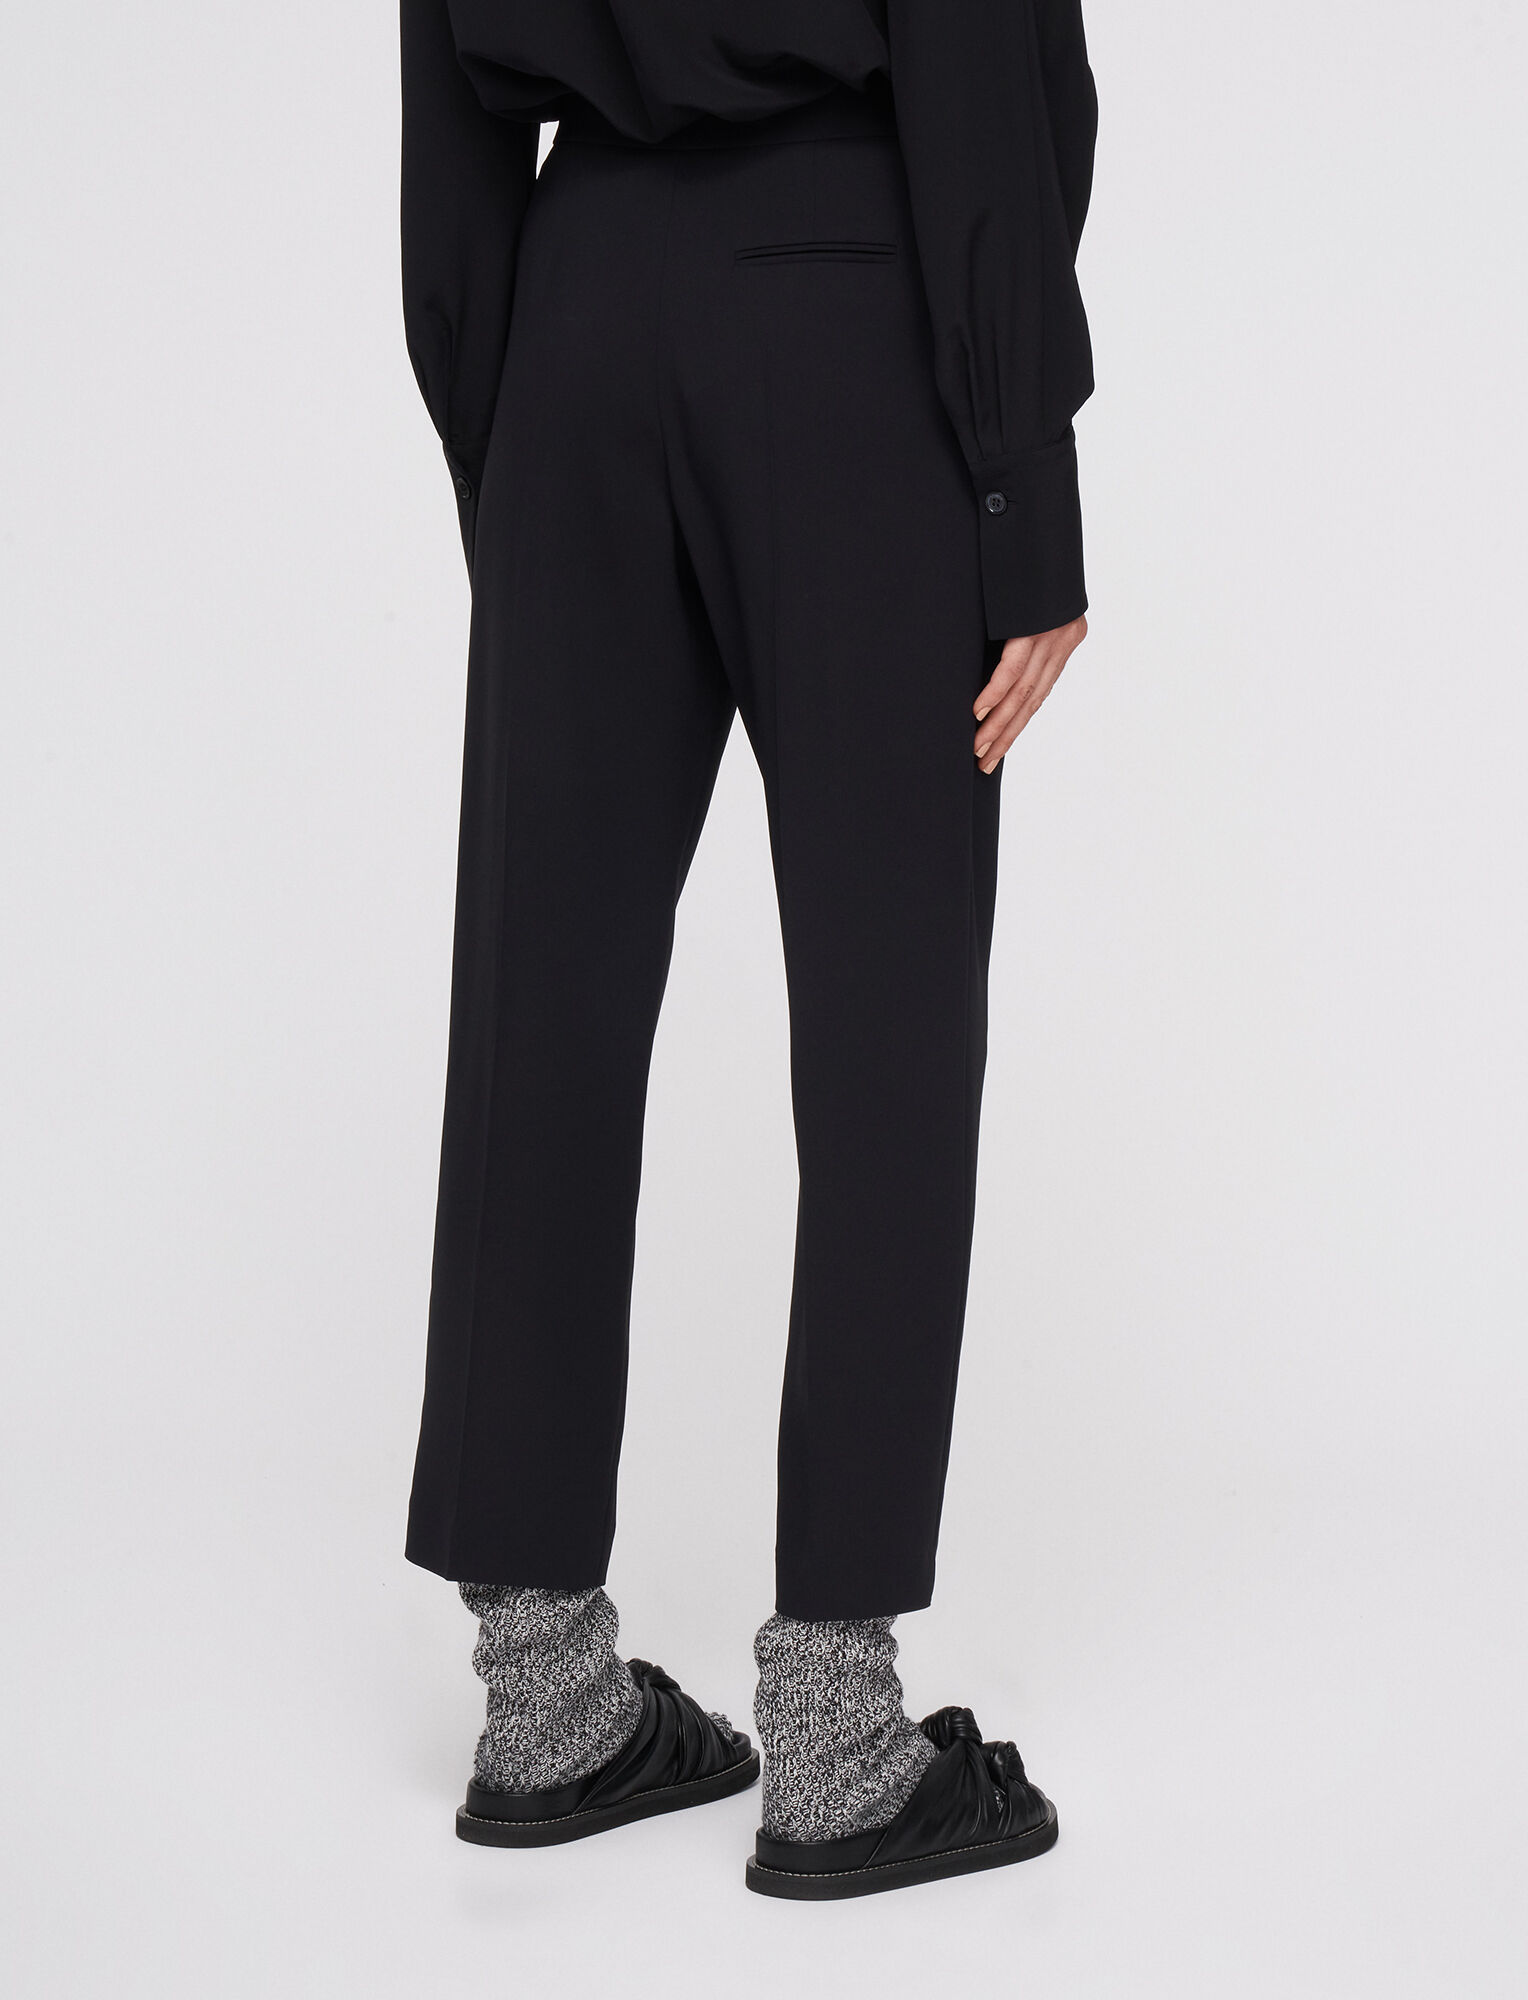 Joseph, Comfort Cady Thea Trousers, in Black